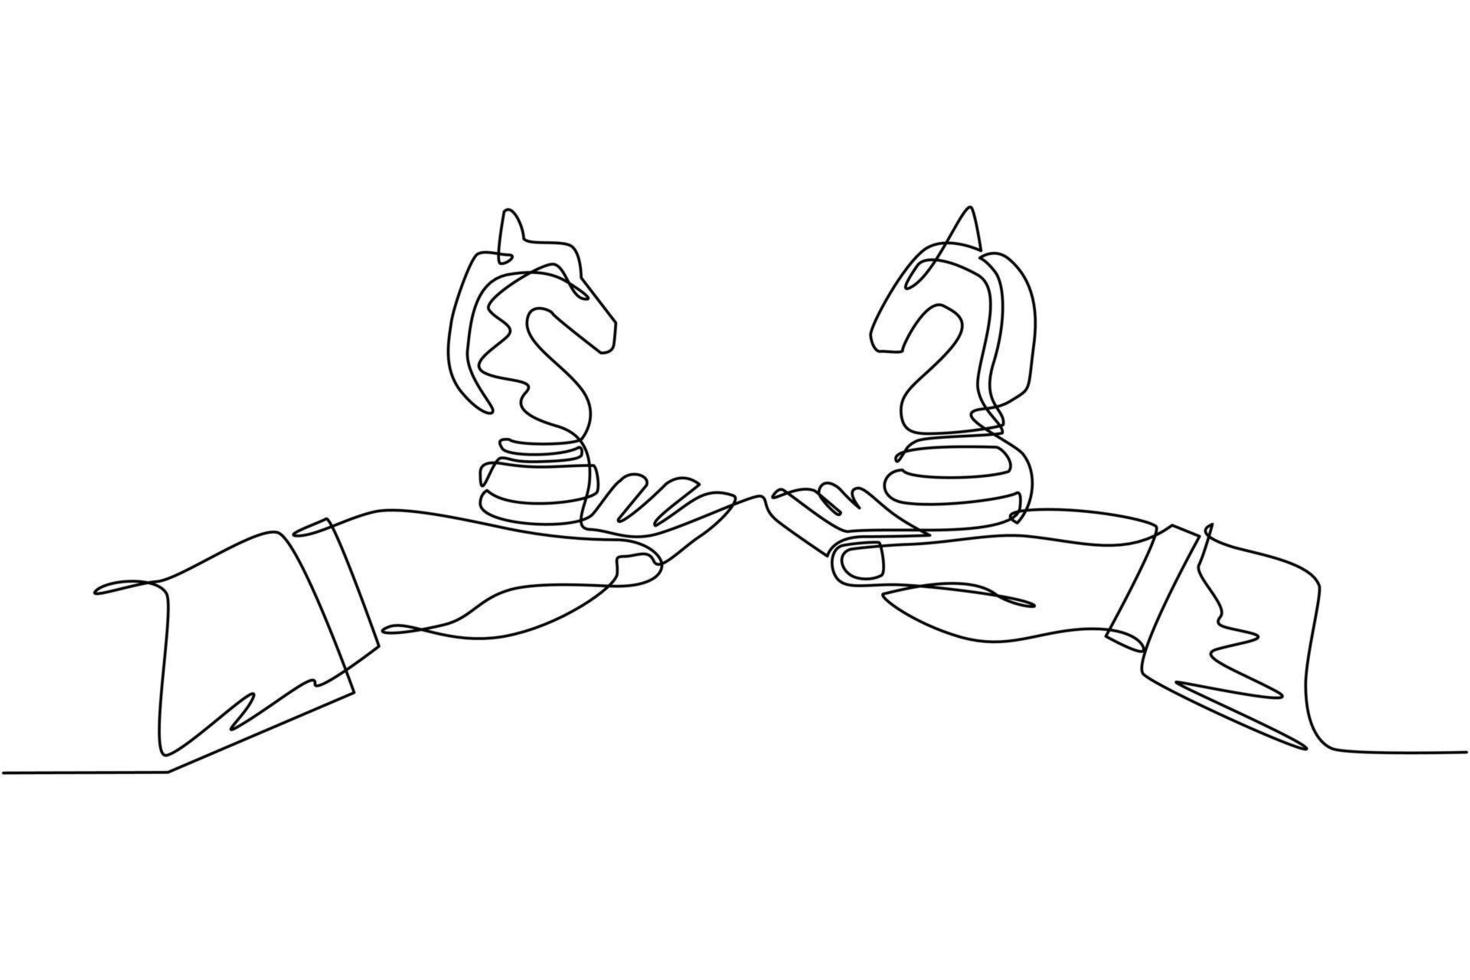 Single one line drawing business concept, of businessman hands, one holding knight chess piece and the other hand too. Strategy and management. Continuous line draw design graphic vector illustration